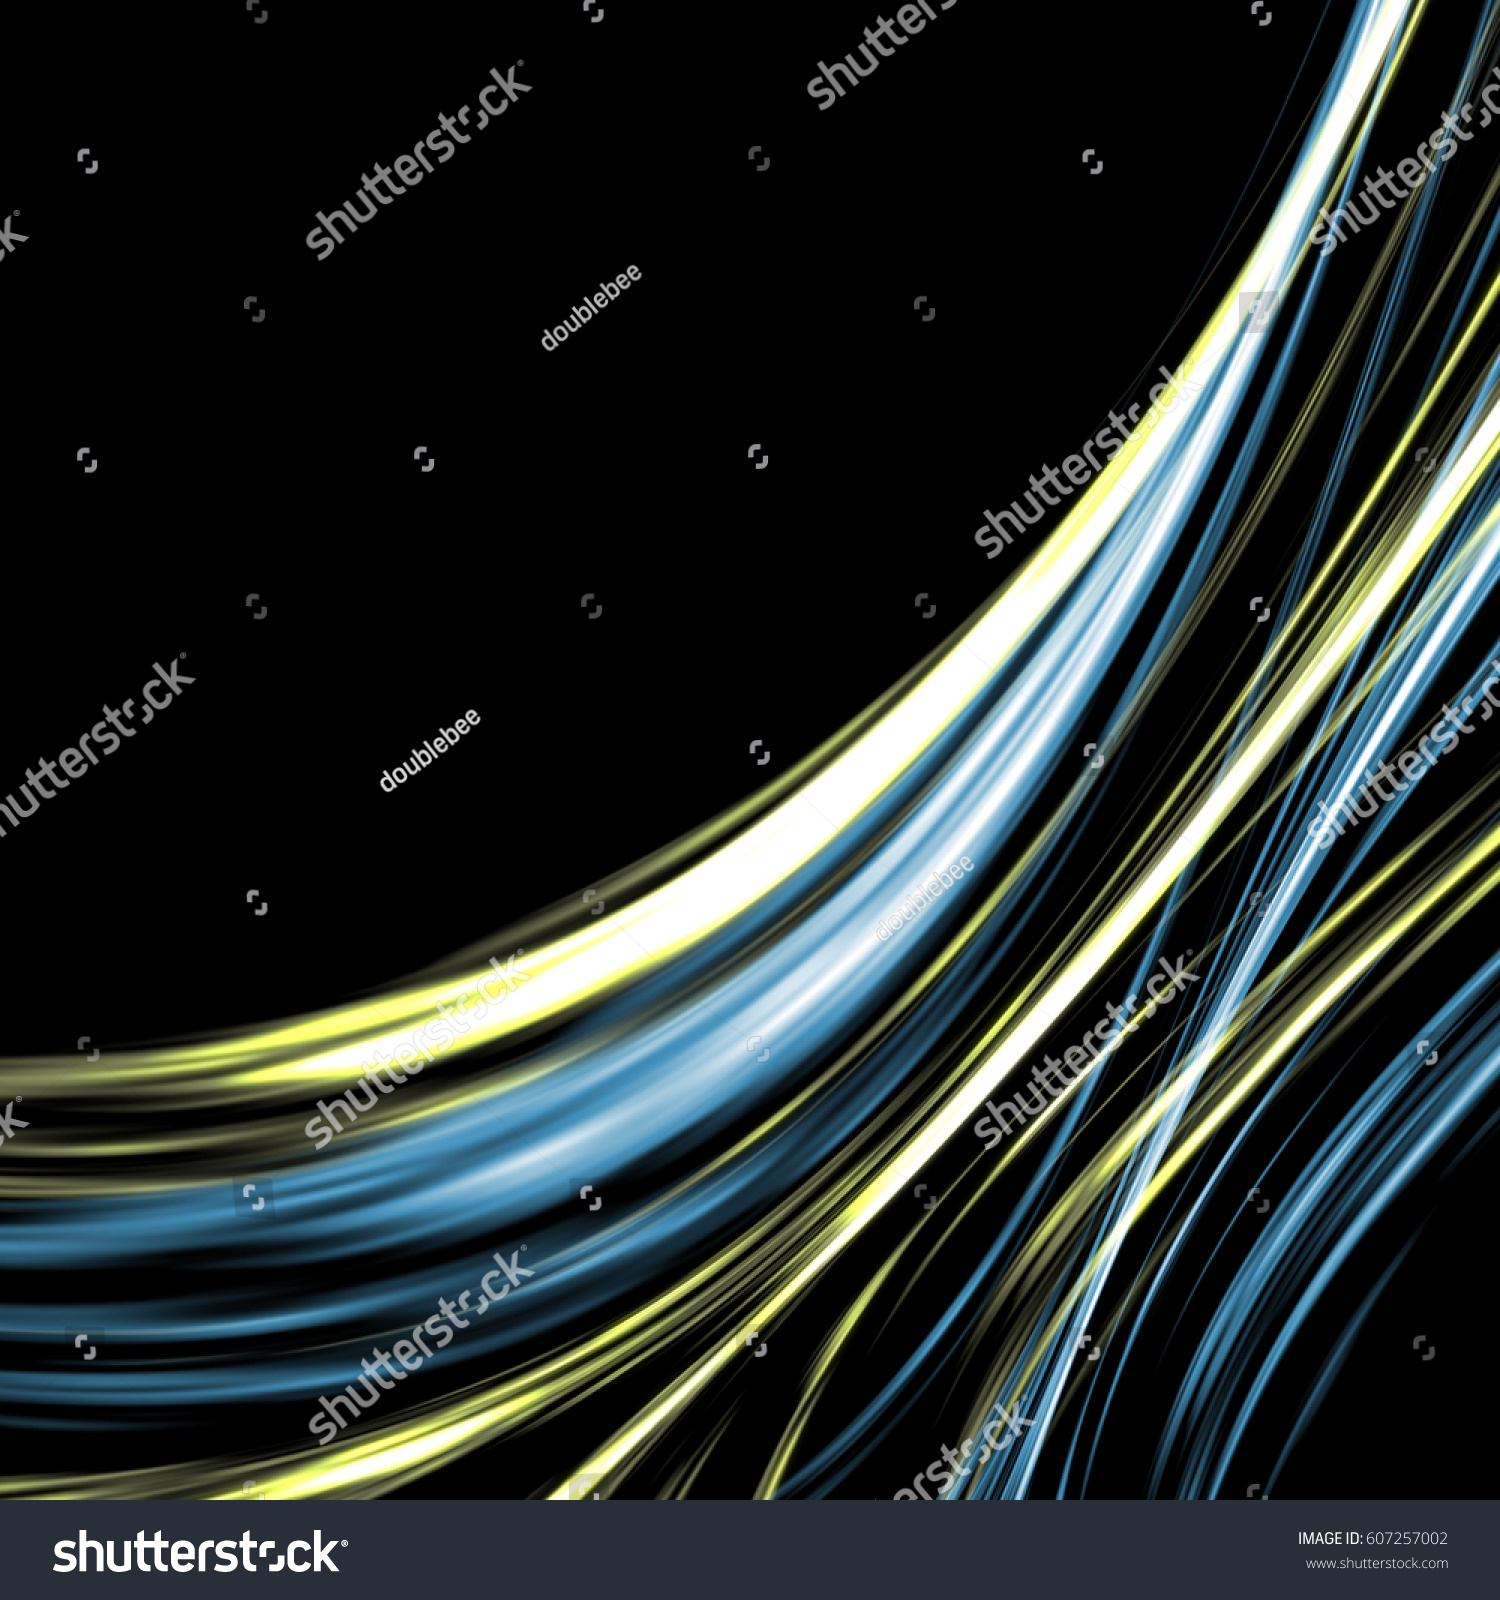 Edit Vectors Free Online - Abstract technology | Shutterstock Editor